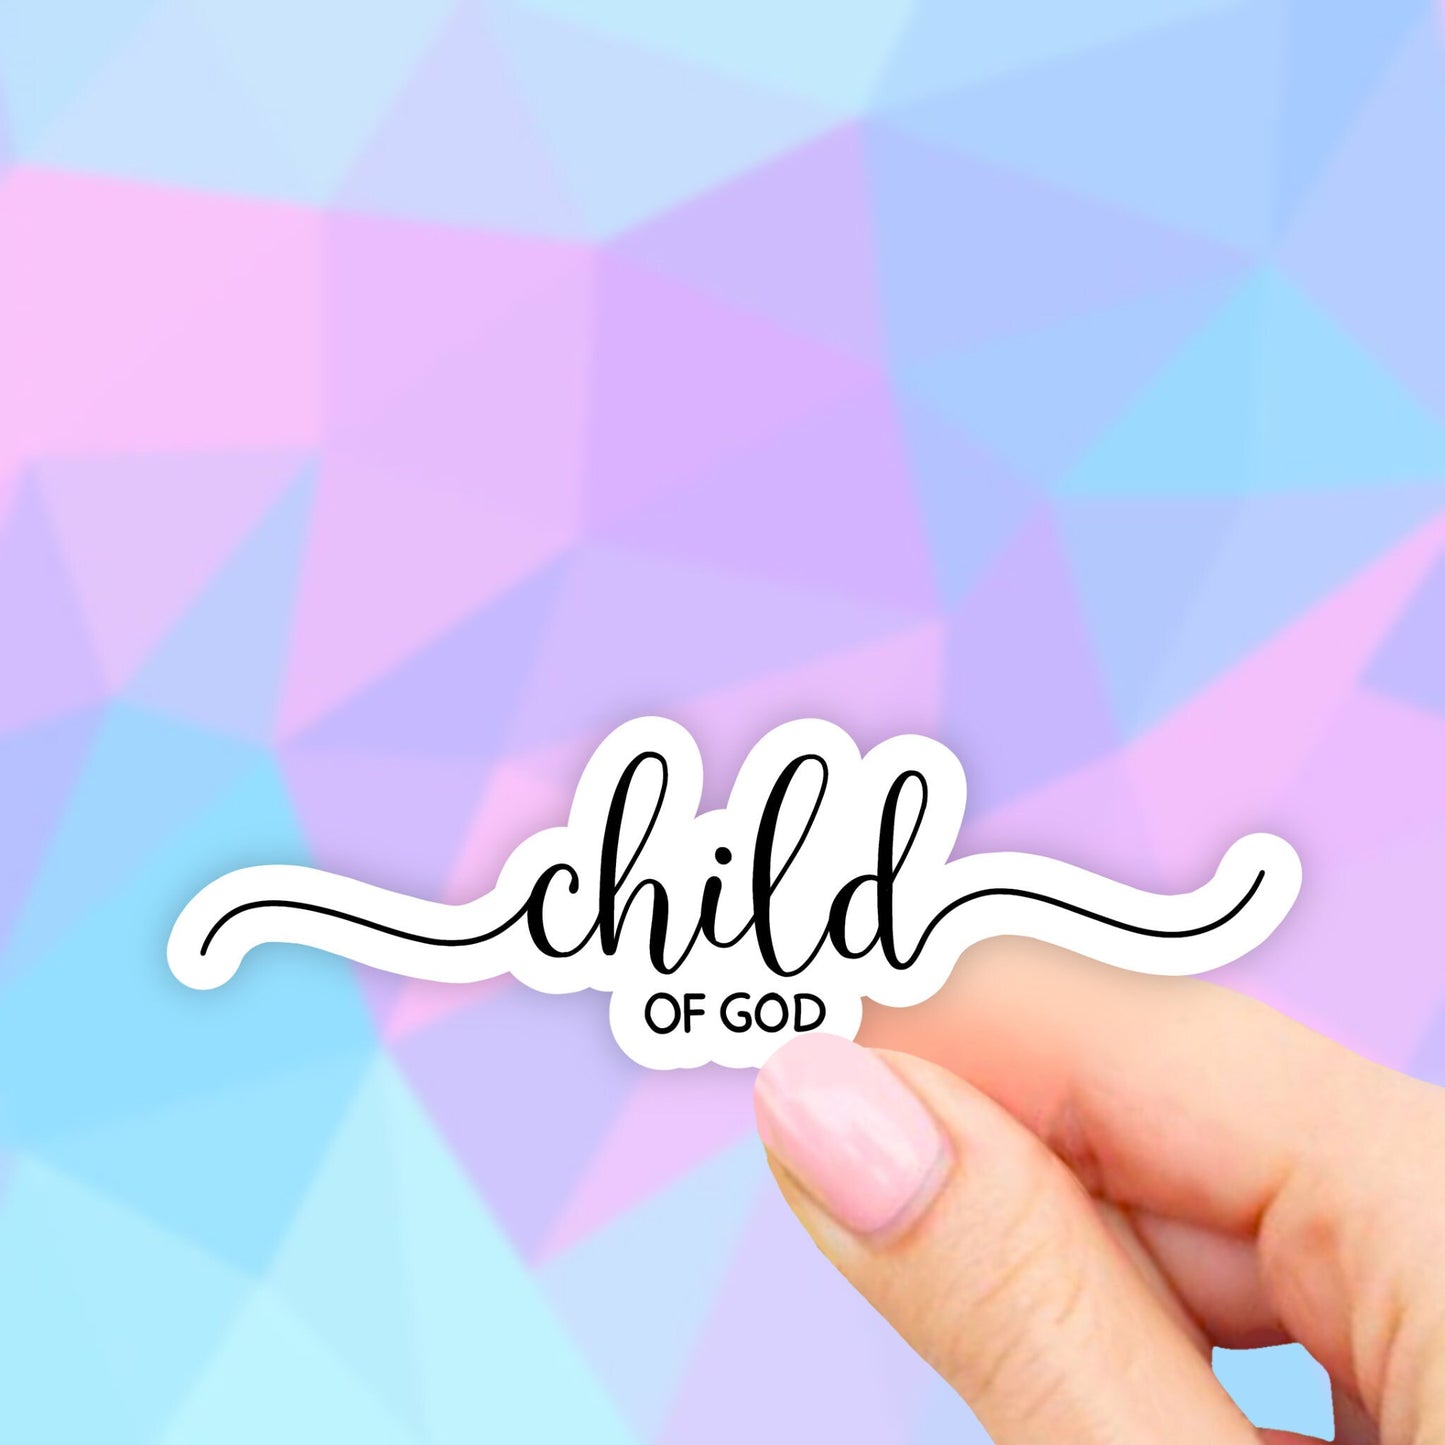 Child of god Sticker, Religious Stickers, Christian Stickers, VSCO Stcickers, Aesthetic Stickers, Water bottle Stickers, Computer stickers